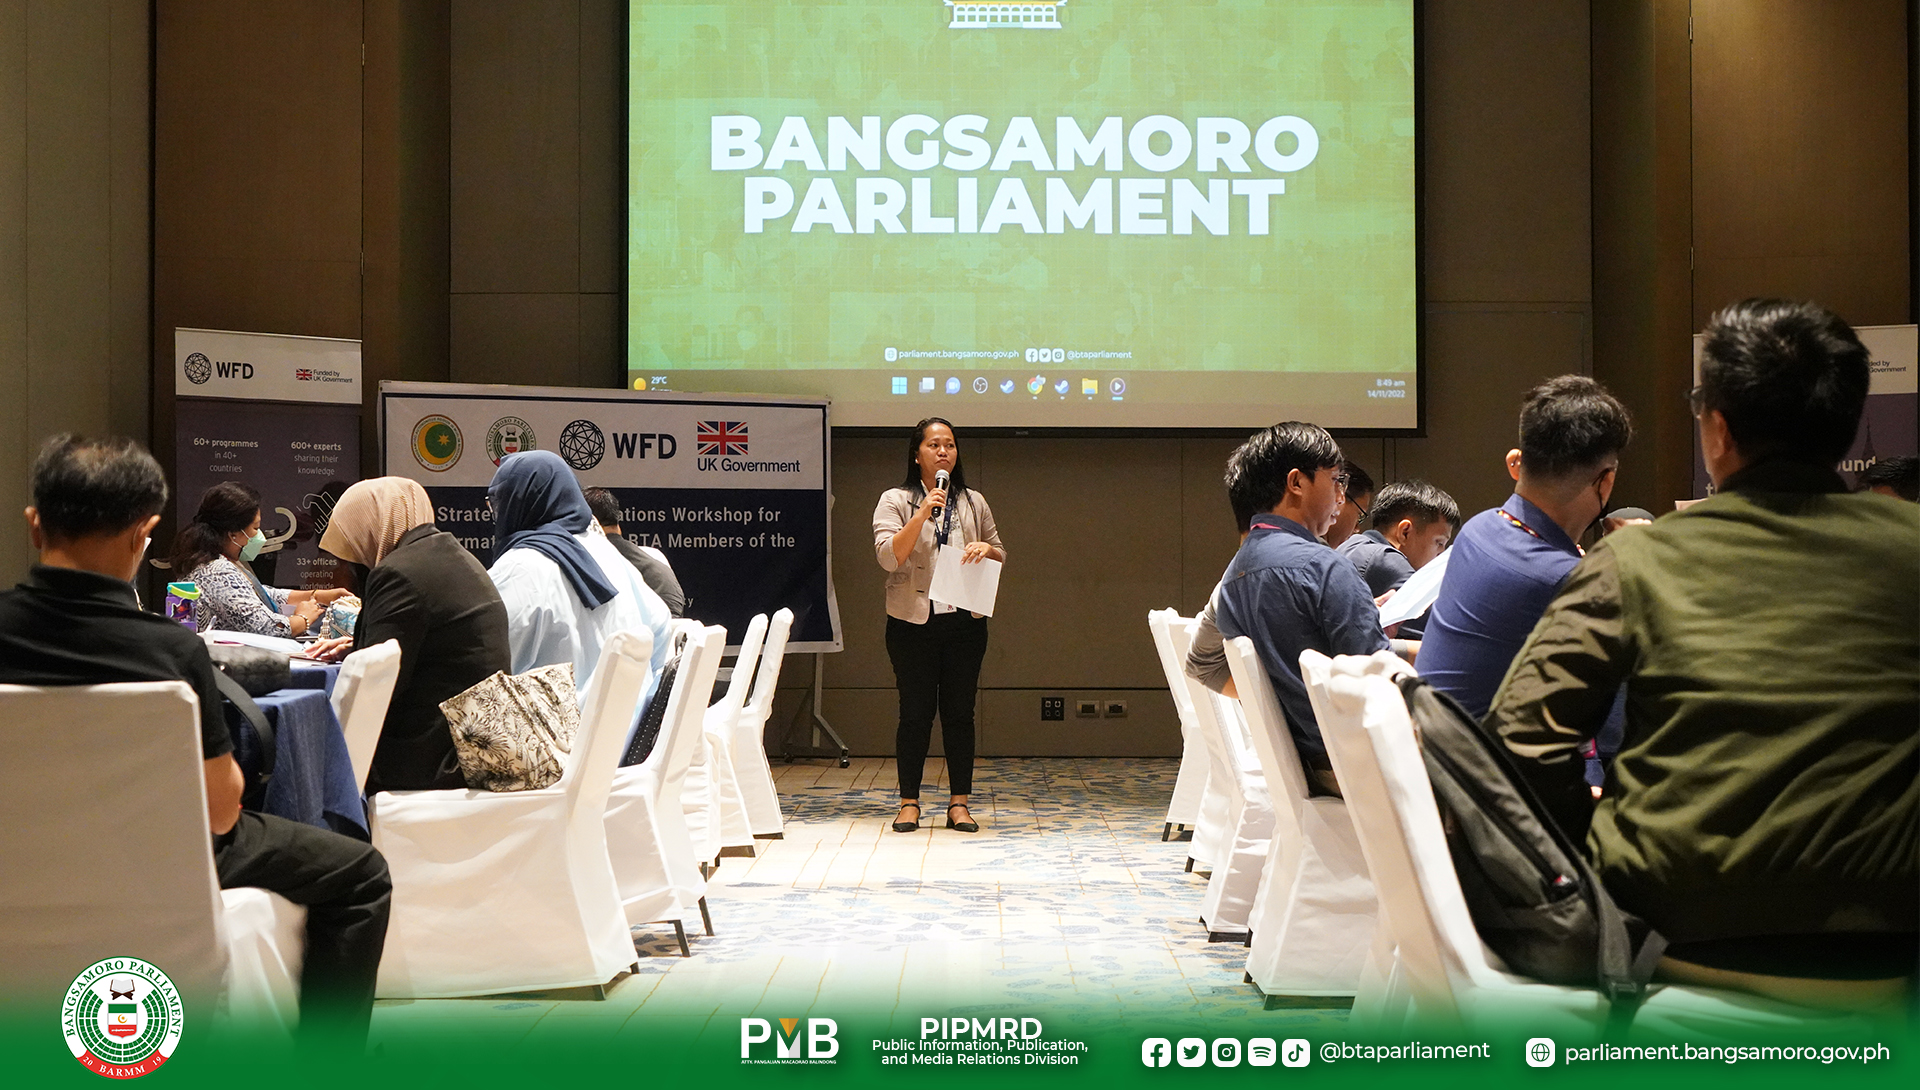 A woman with a microphone stands in front of an audience. Behind her a screen says Bangsamoro Parliament